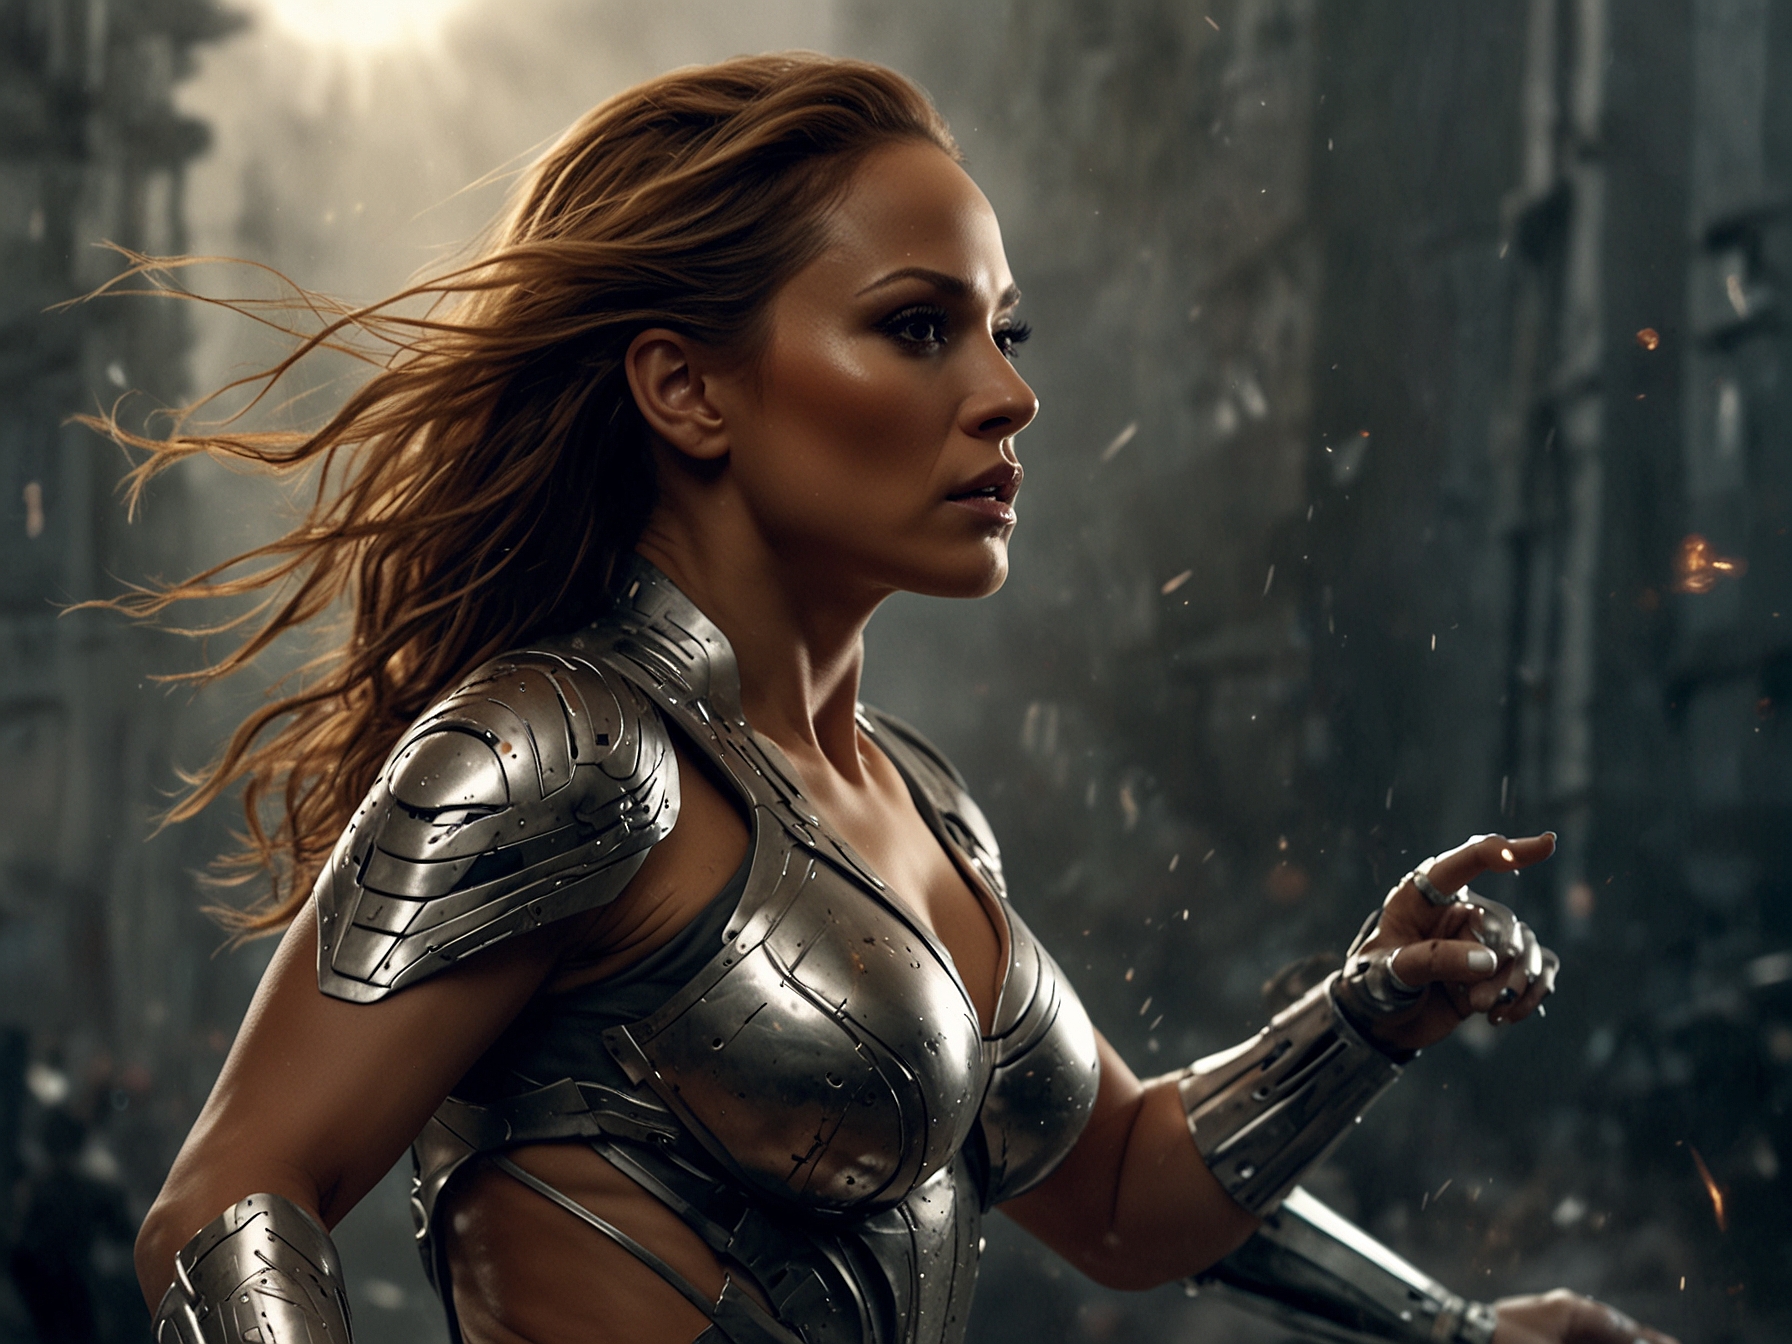 A dramatic still from the sci-fi film 'Atlas,' featuring Jennifer Lopez in an intense action scene. The impressive special effects and compelling performance highlight the film's appeal to audiences.